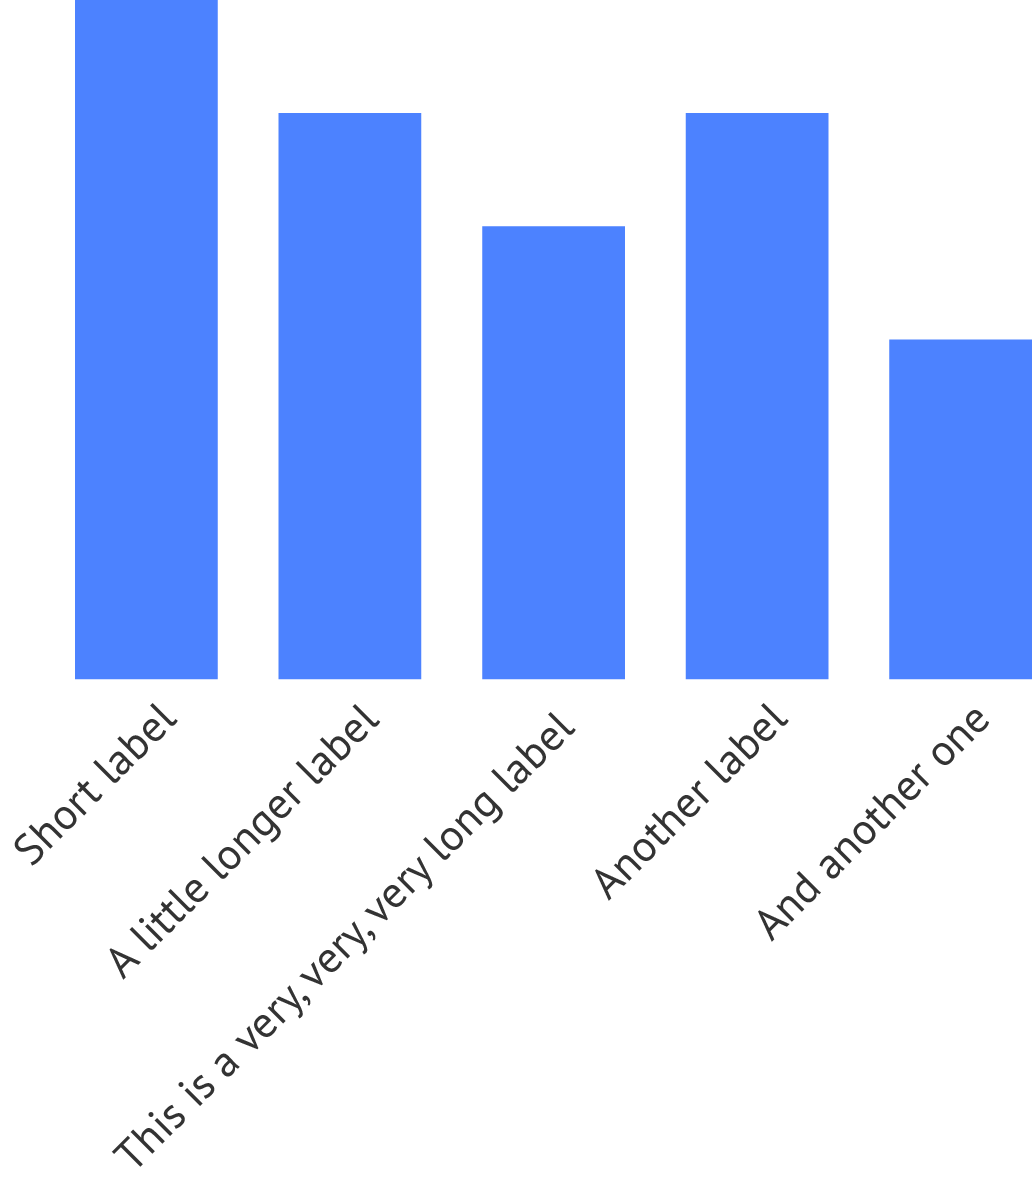 A vertical bar chart with rotated labels